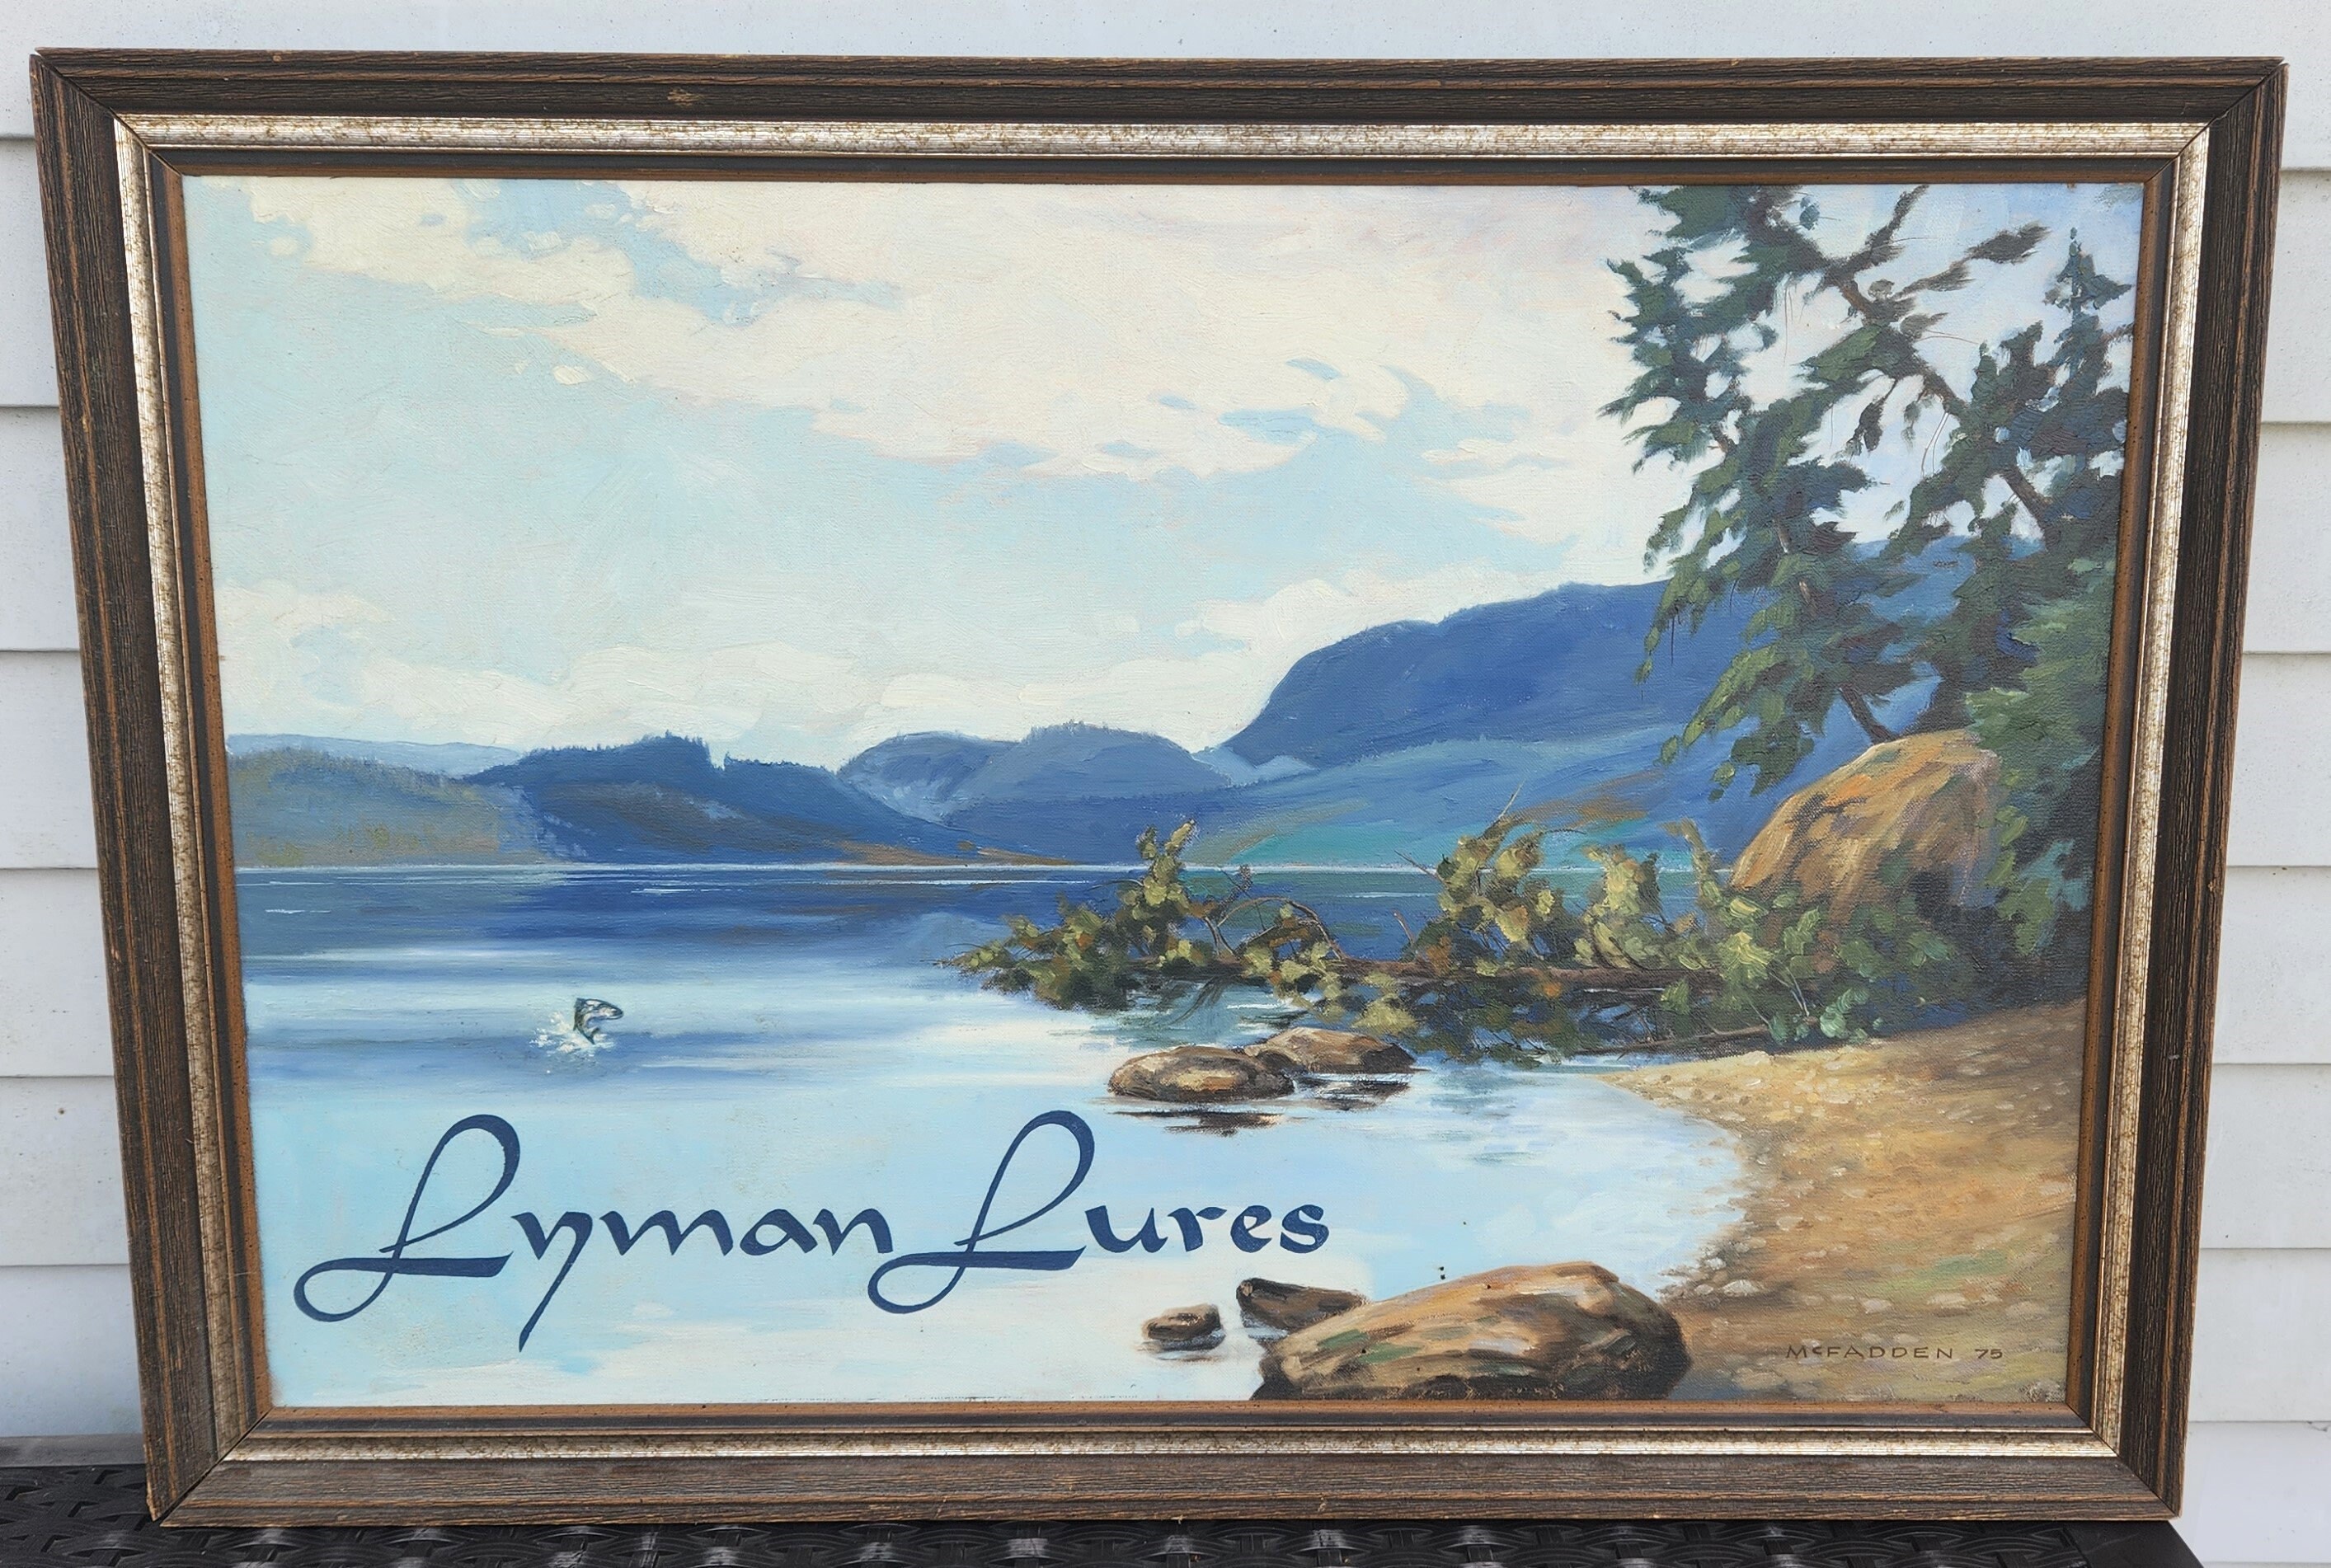 Original Lyman Lures Advertising Painting Signed by Mcfadden Ca